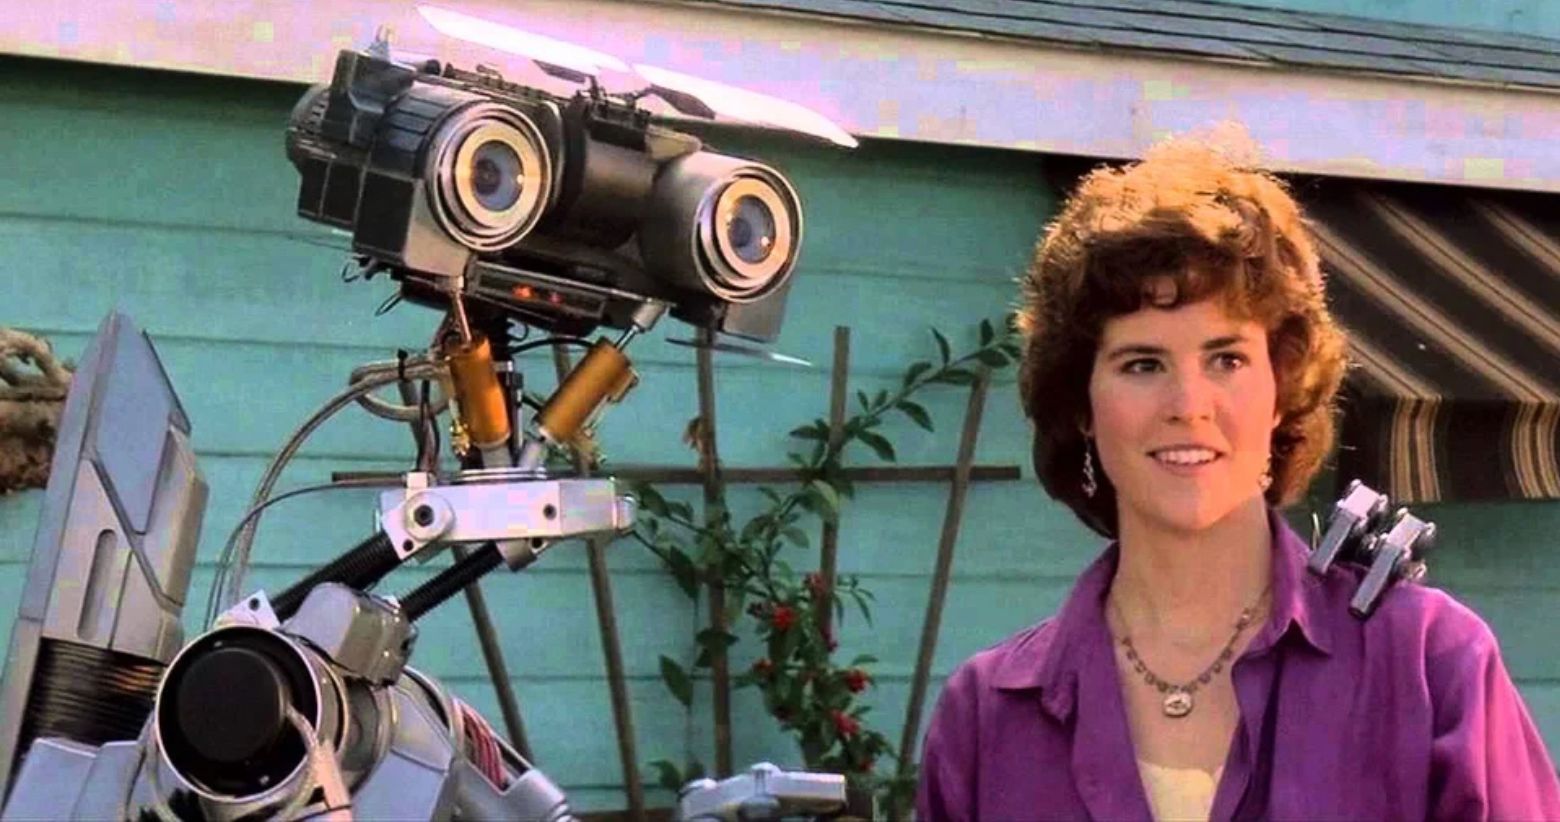 Short Circuit' superfan Richard Bates bought house used in movie